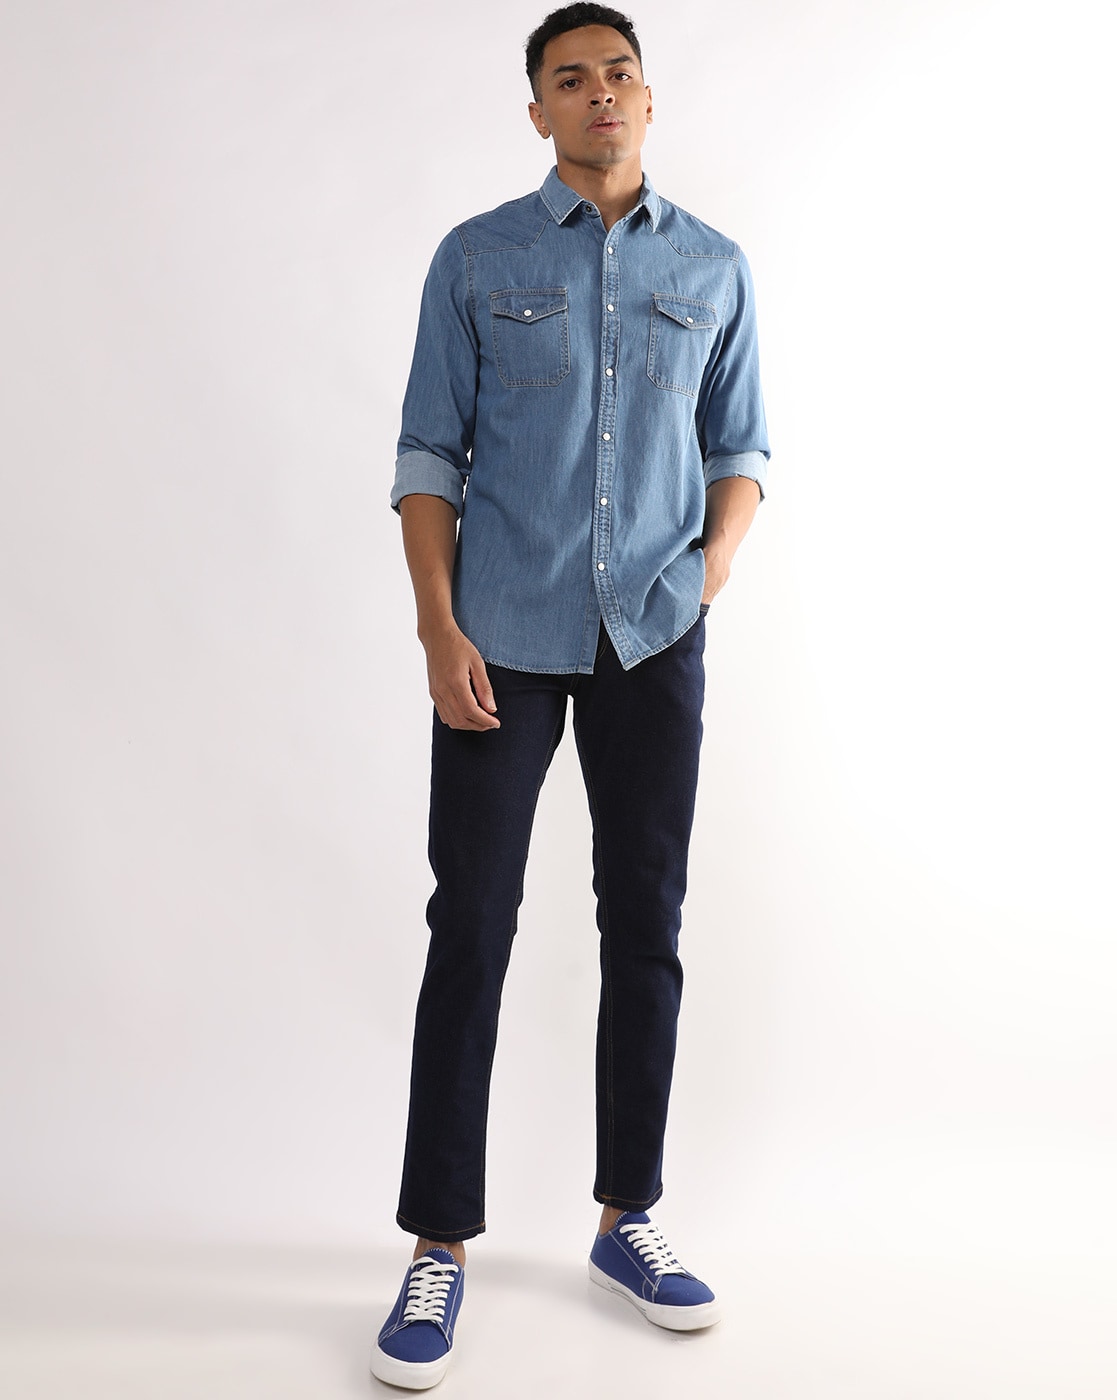 The Best Denim Shirt Outfits For Men | Andrew Brookes Tailoring